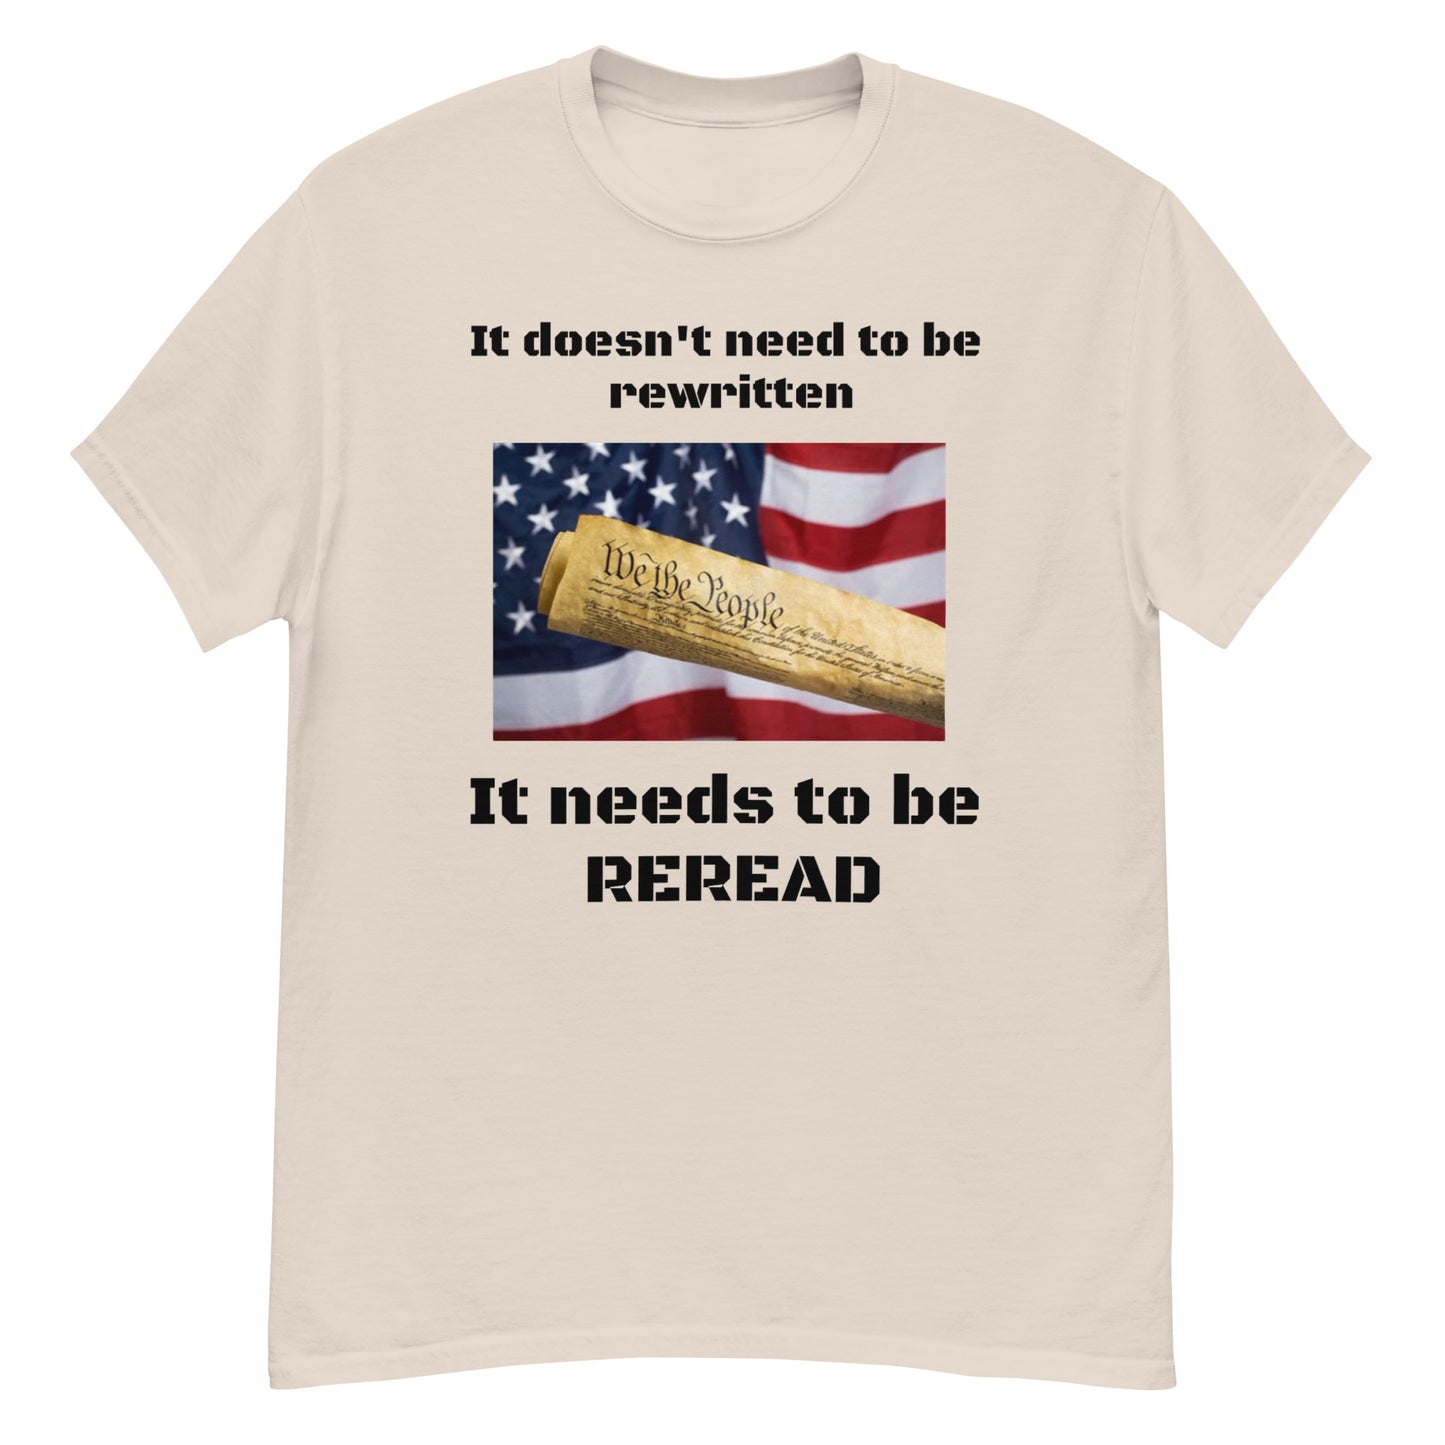 It doesn't need to be rewritten...it needs to be reread classic tee